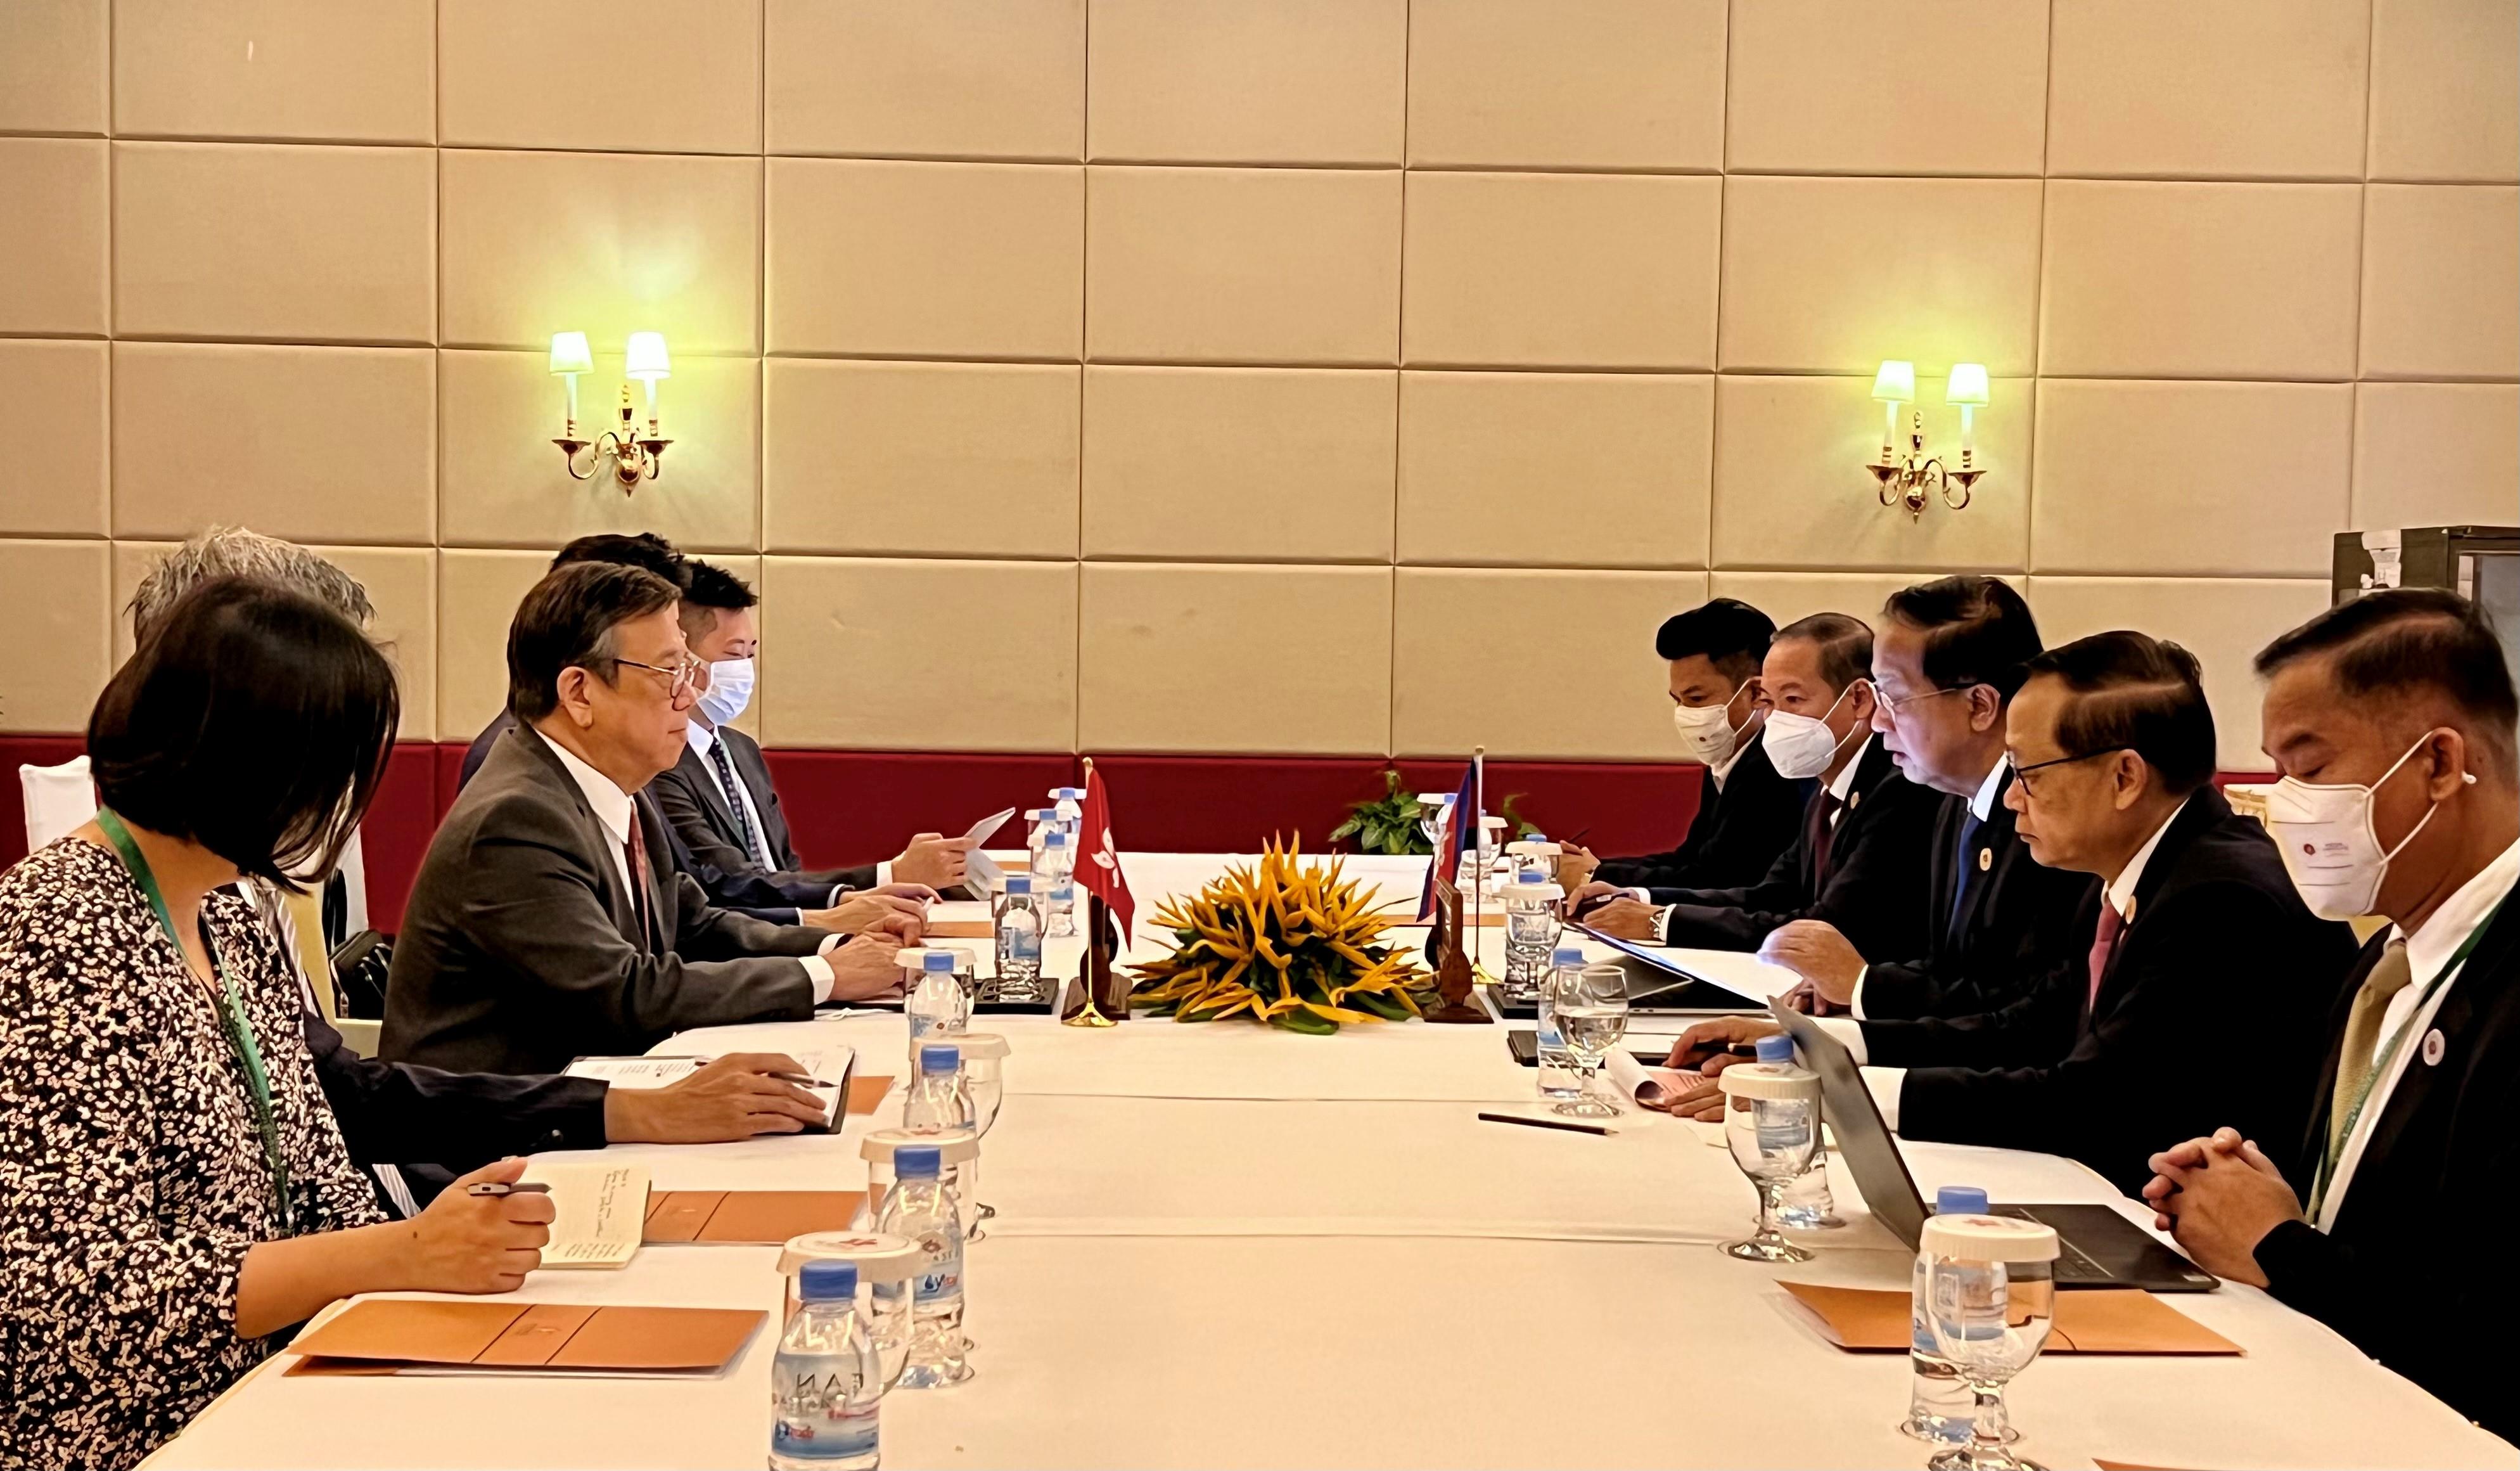 The Secretary for Commerce and Economic Development, Mr Algernon Yau (third left), met with the Minister of Commerce of Cambodia, Mr Pan Sorasak (third right), in Siem Reap, Cambodia, today (September 17) to exchange views on issues of mutual interest.